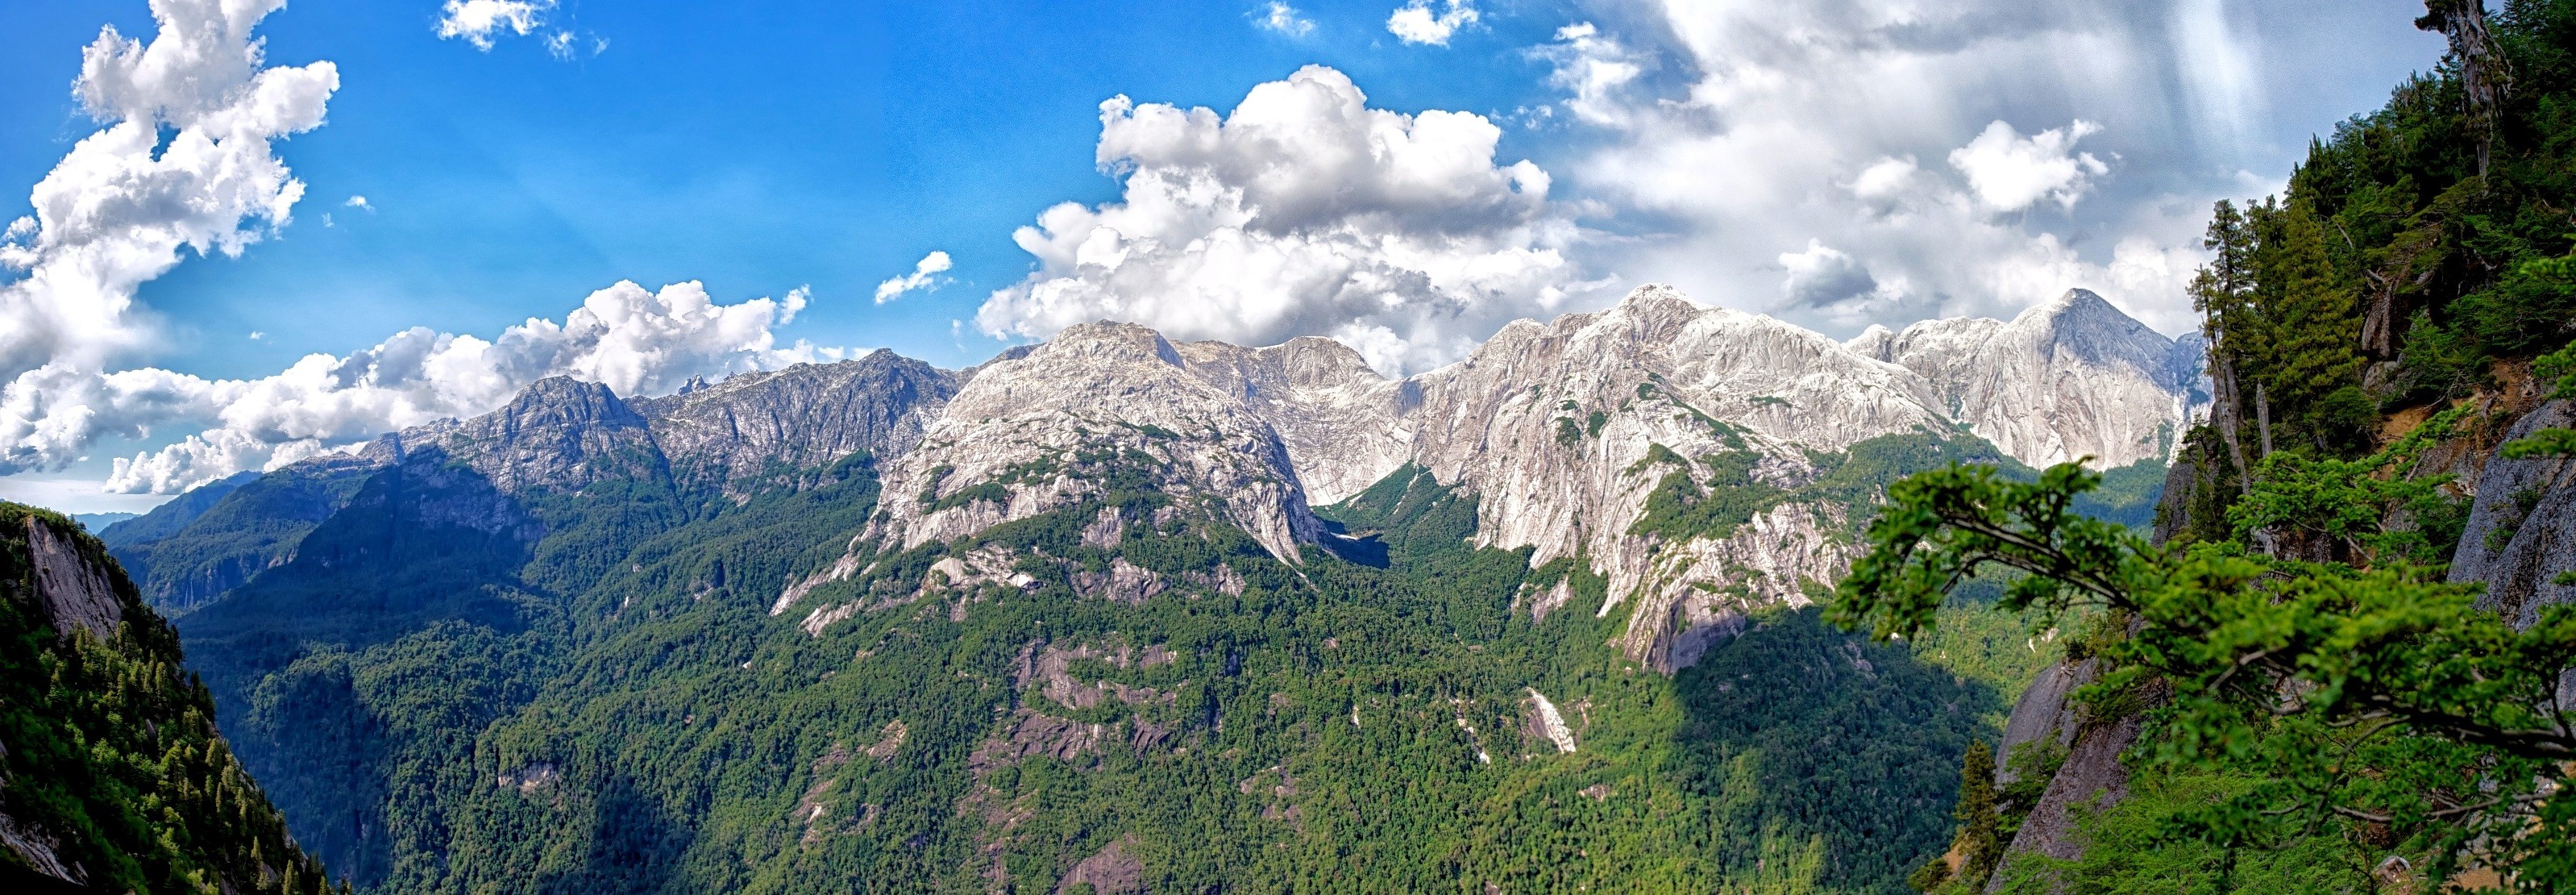 mountain, Panoramas, Forest, Clouds, Chile, Valley, Cliff, Summer, Nature, Landscape Wallpaper